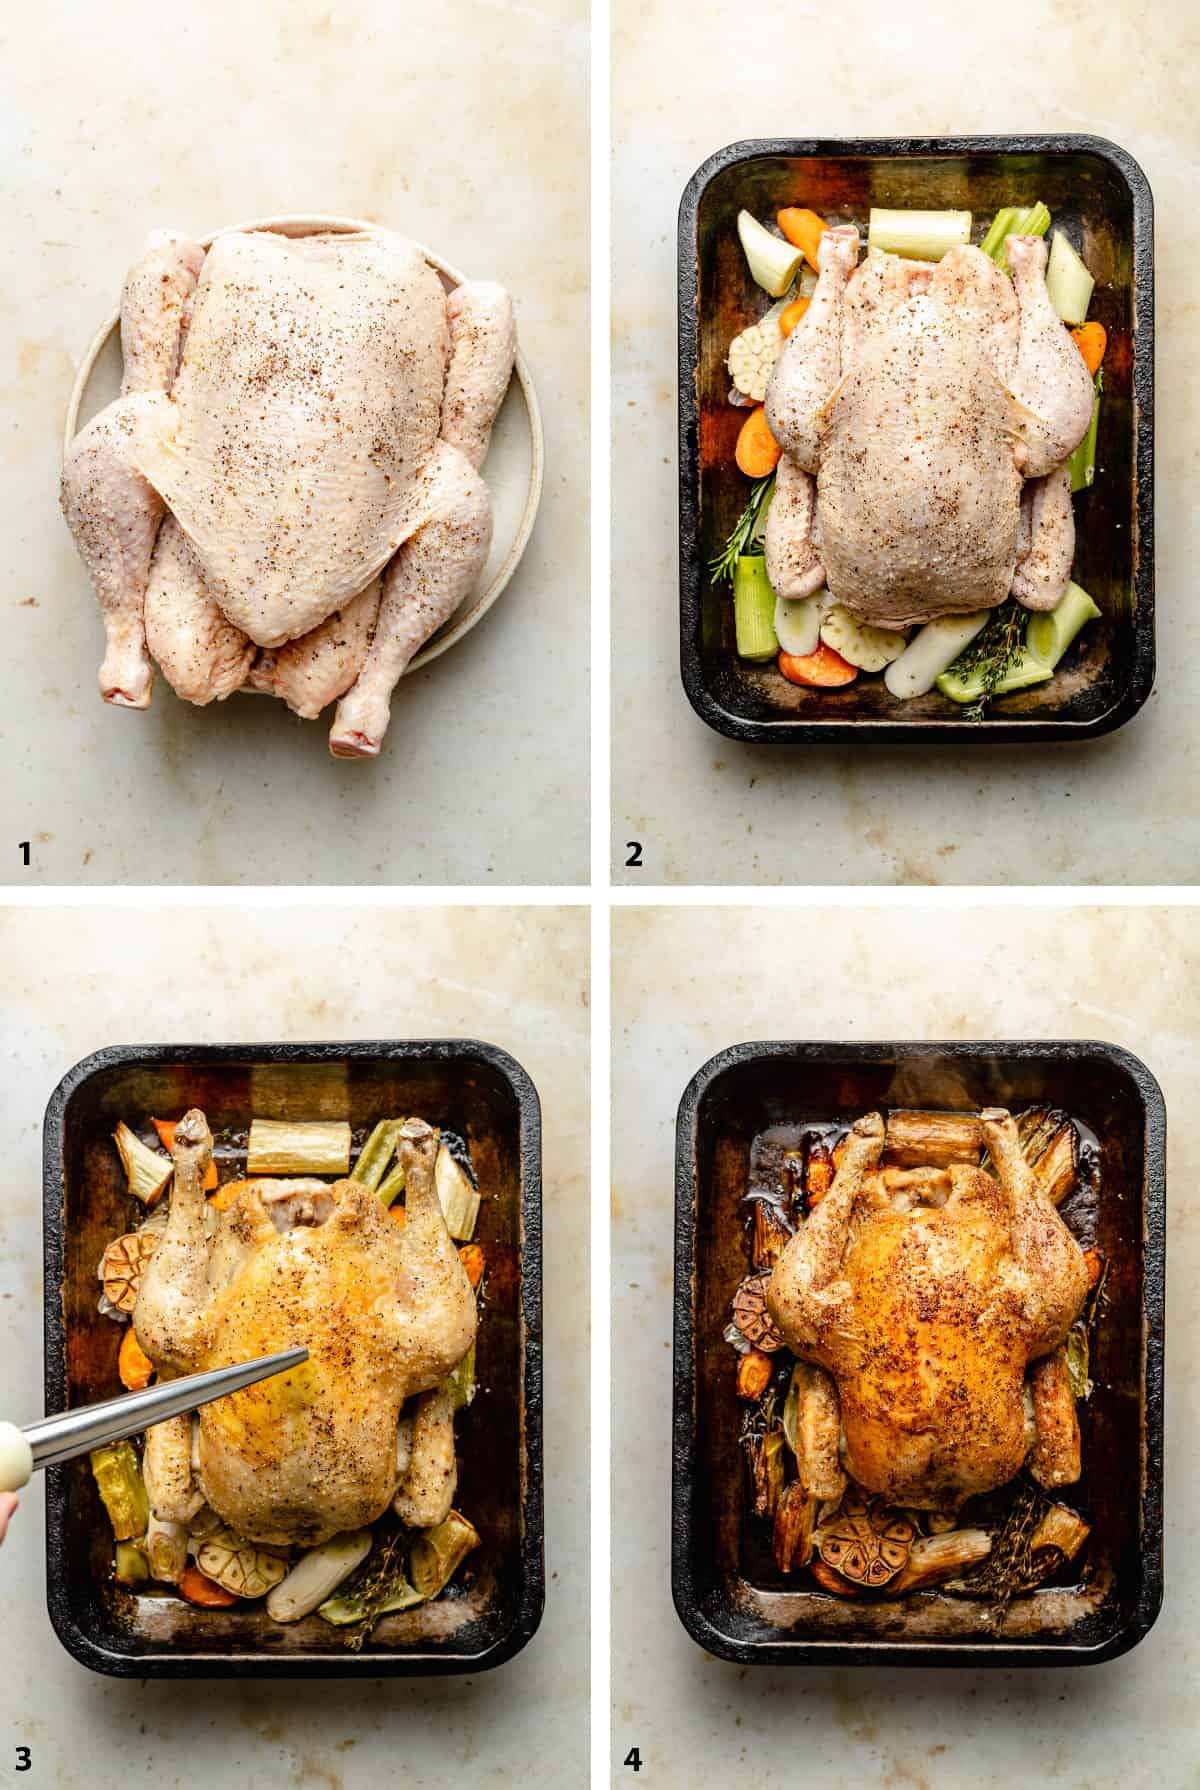 Process of preparing the whole chicken and roasting on a trivet of vegetables. 